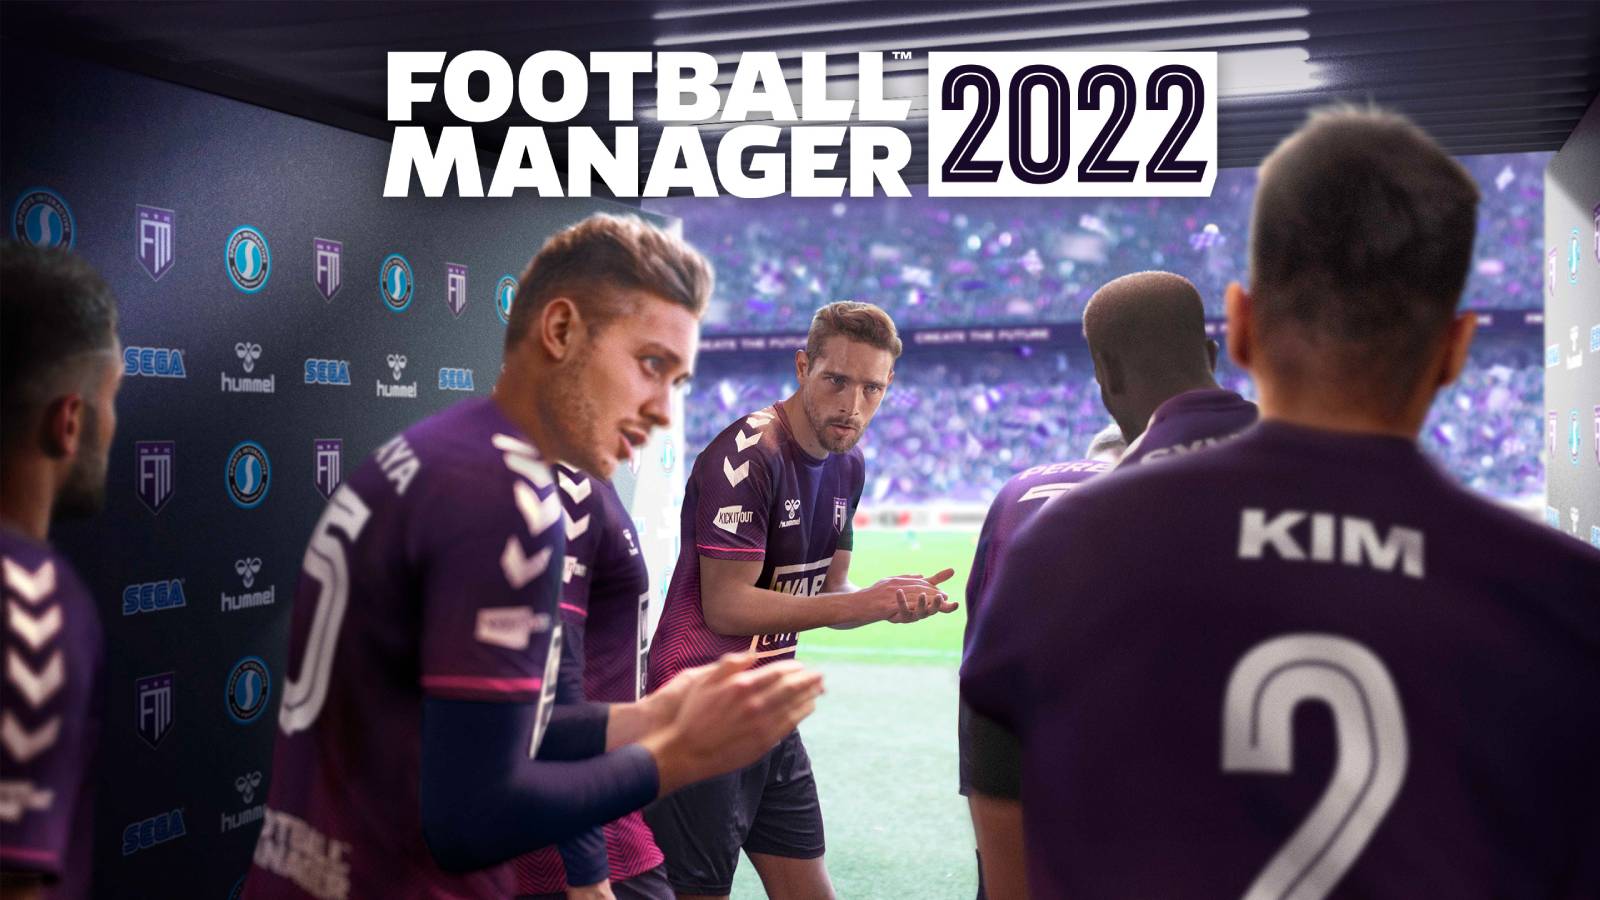 Football Manager 2022 has sold one million copies globally via Gamepass and other platforms